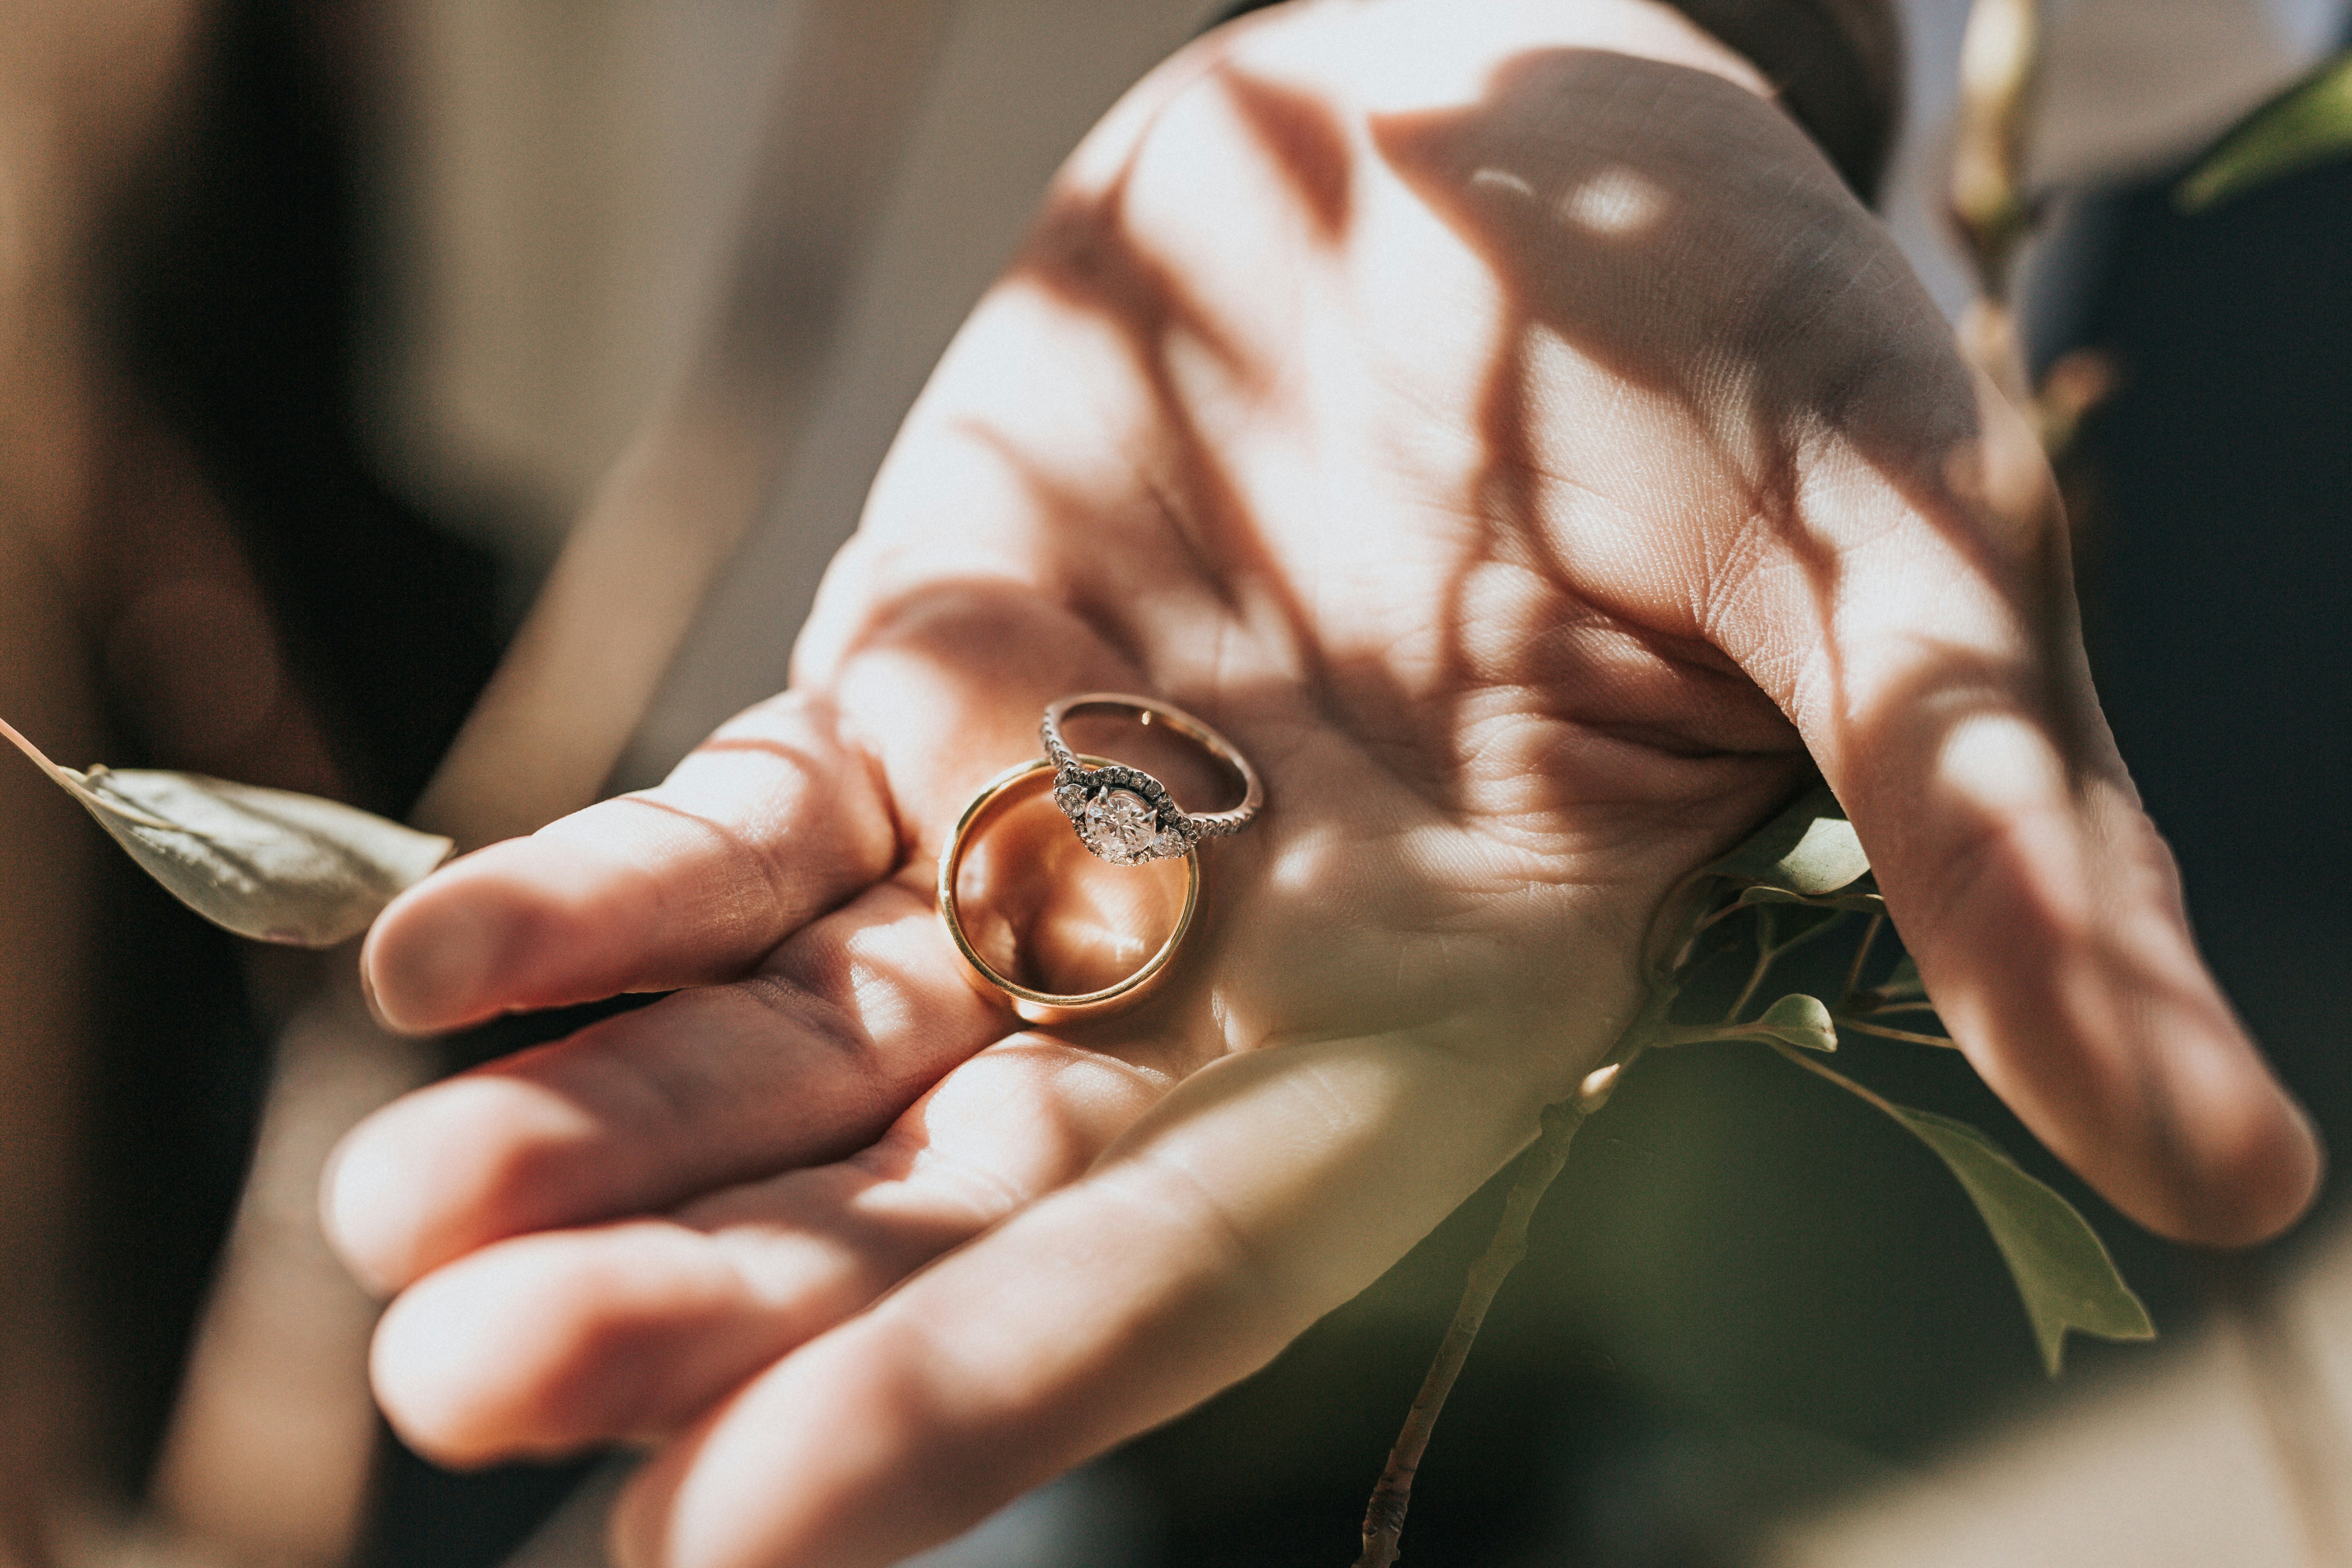 A person holding rings | Source: Unsplash